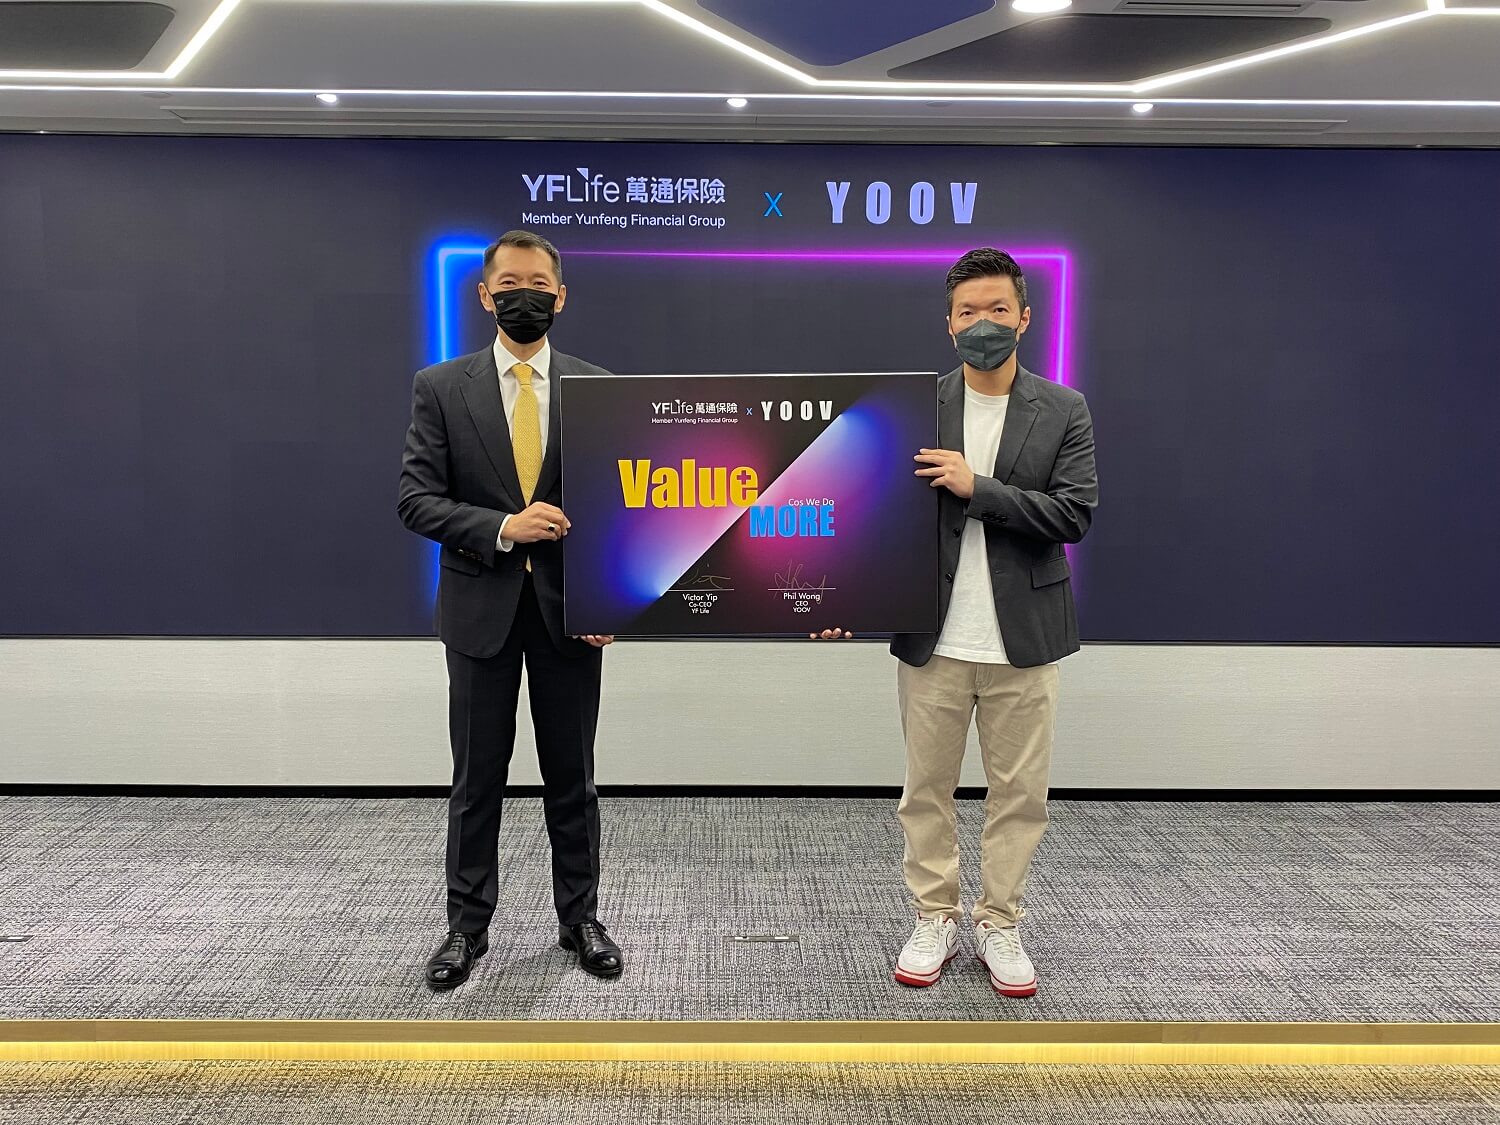 Mr. Victor Yip, Co-Chief Executive Officer of YF Life (left) and Mr. Phil Wong, Chief Executive Officer of YOOV (right) officiate at the signing ceremony to launch the VALUE+ Program.